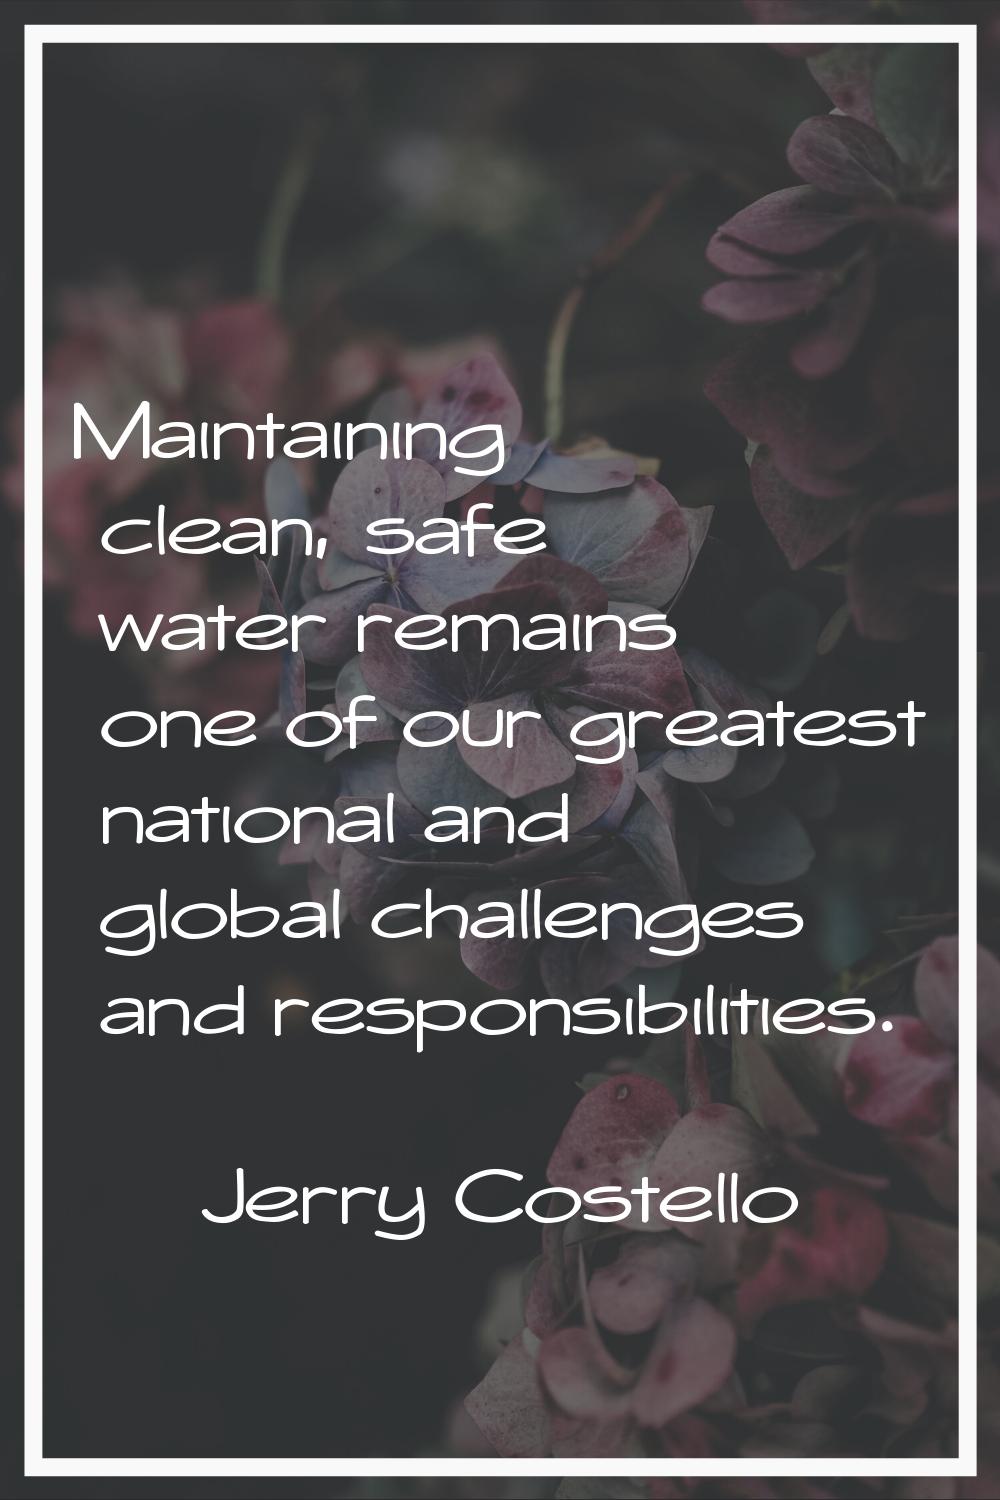 Maintaining clean, safe water remains one of our greatest national and global challenges and respon